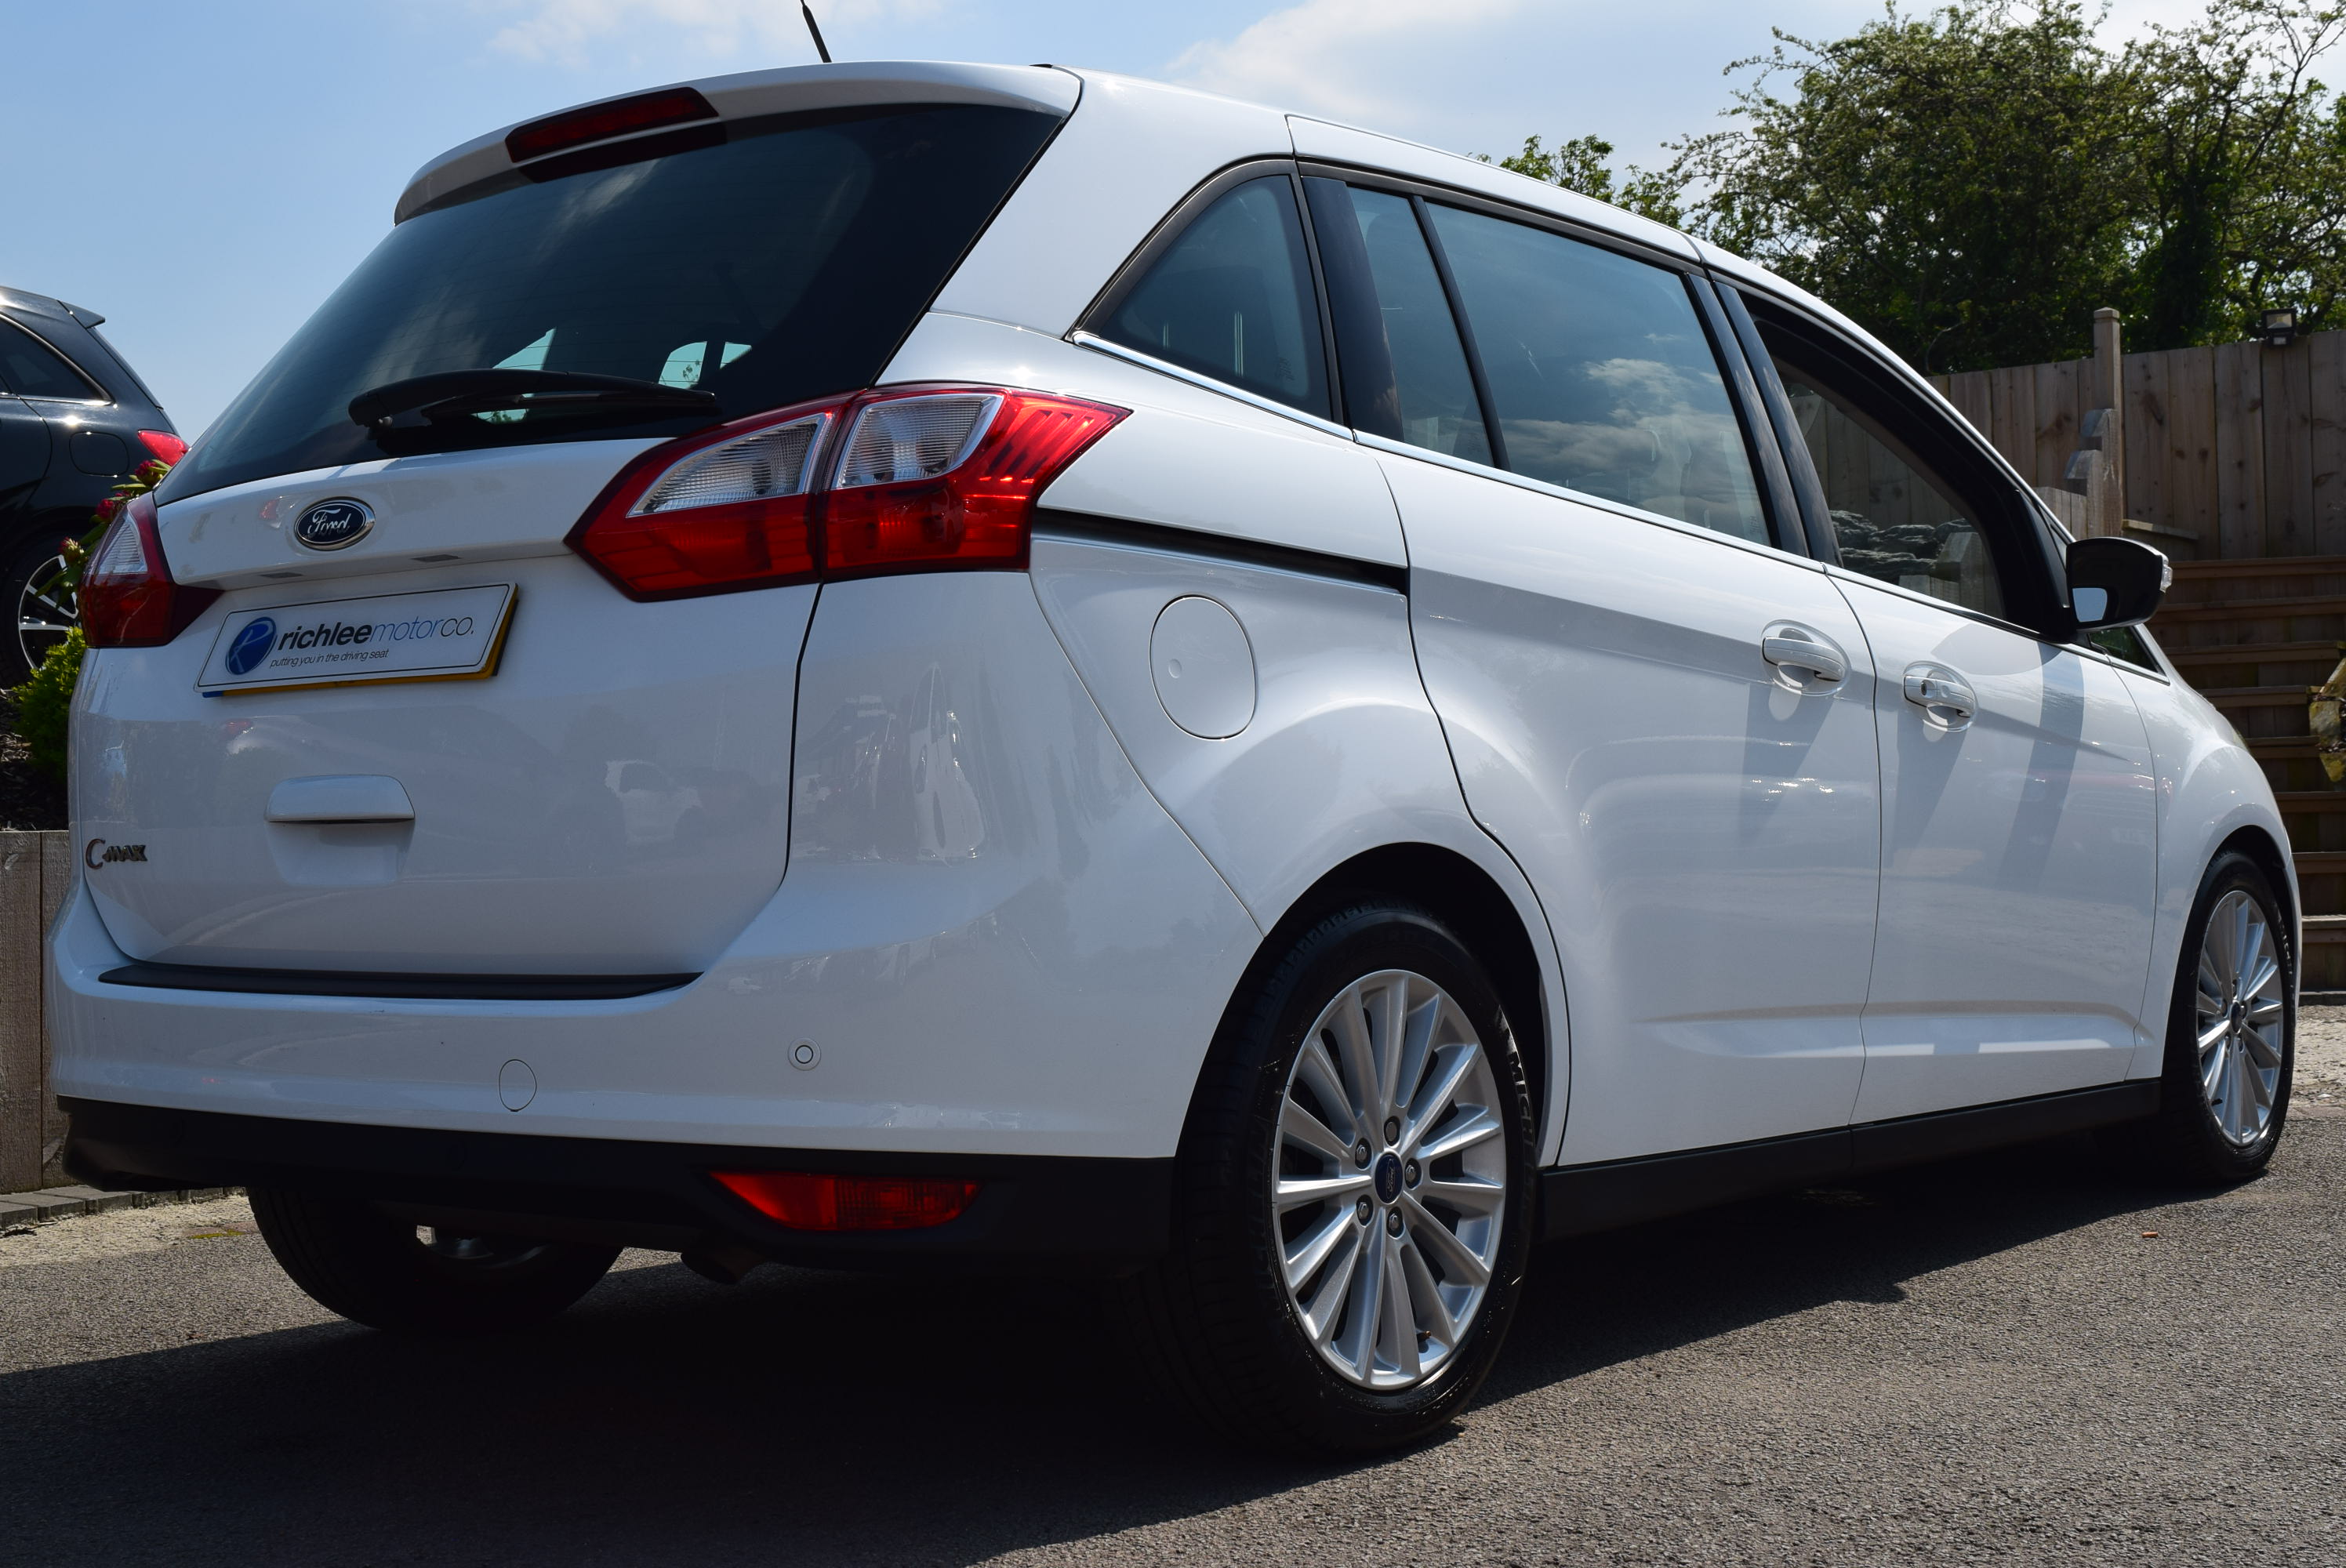 FORD GRAND CMAX 2.0 TDCi Titanium 5dr For Sale Richlee